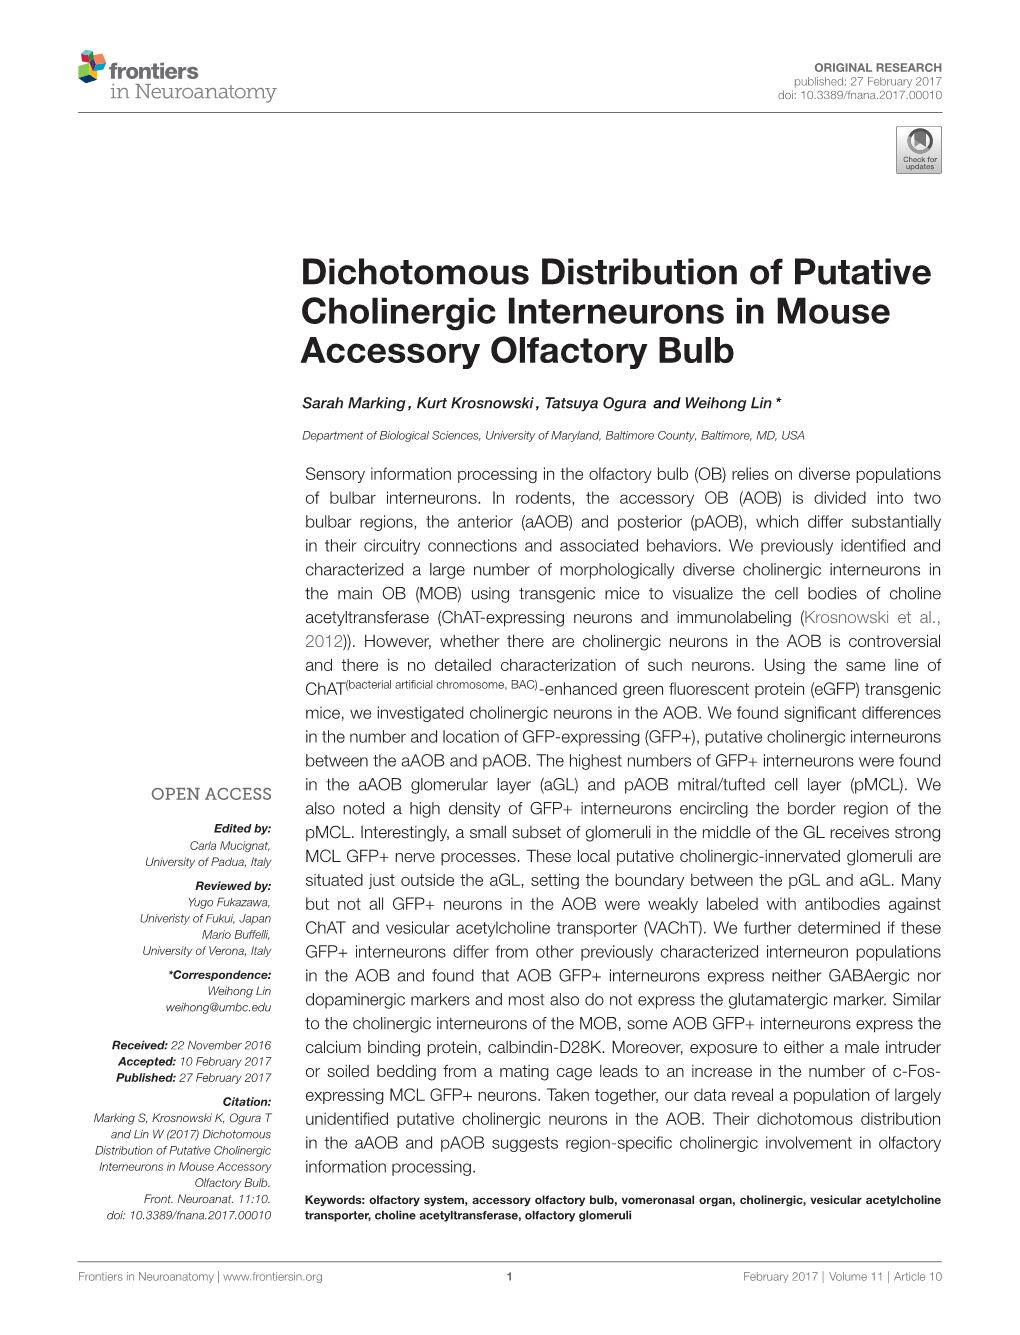 Dichotomous Distribution of Putative Cholinergic Interneurons in Mouse Accessory Olfactory Bulb